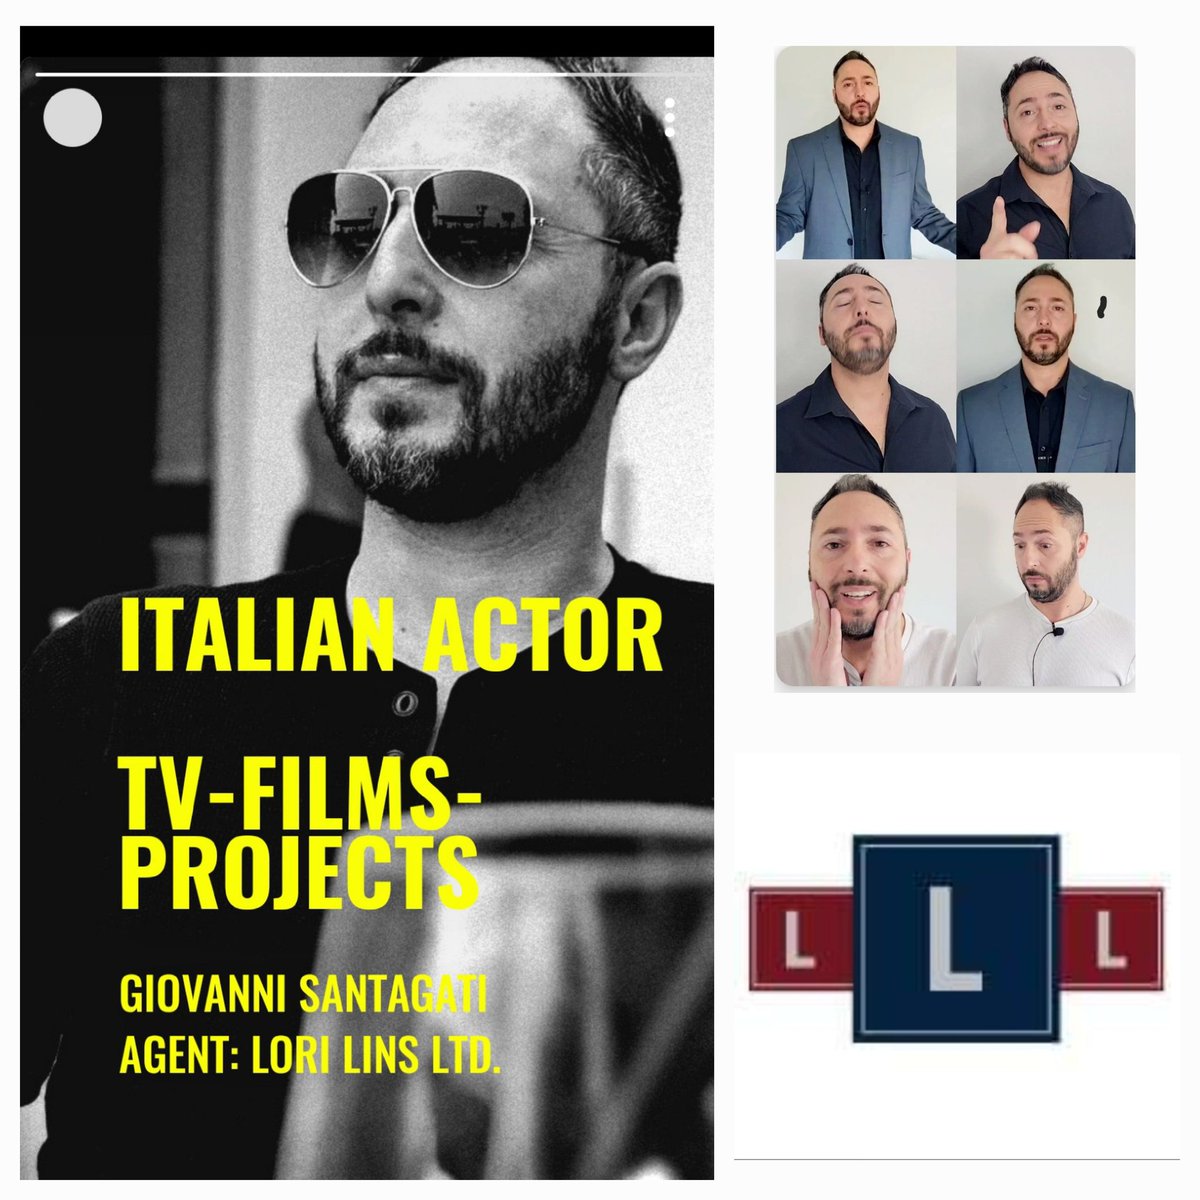 🎬🌍 Ready to collaborate with creative minds who are shaping the future of cinema. Let's make movie magic together! #FilmProduction #actorslife #FilmDirectors #actor #FilmIndustry #Cinematography #FilmMaking #BehindTheScenes #Films #movies